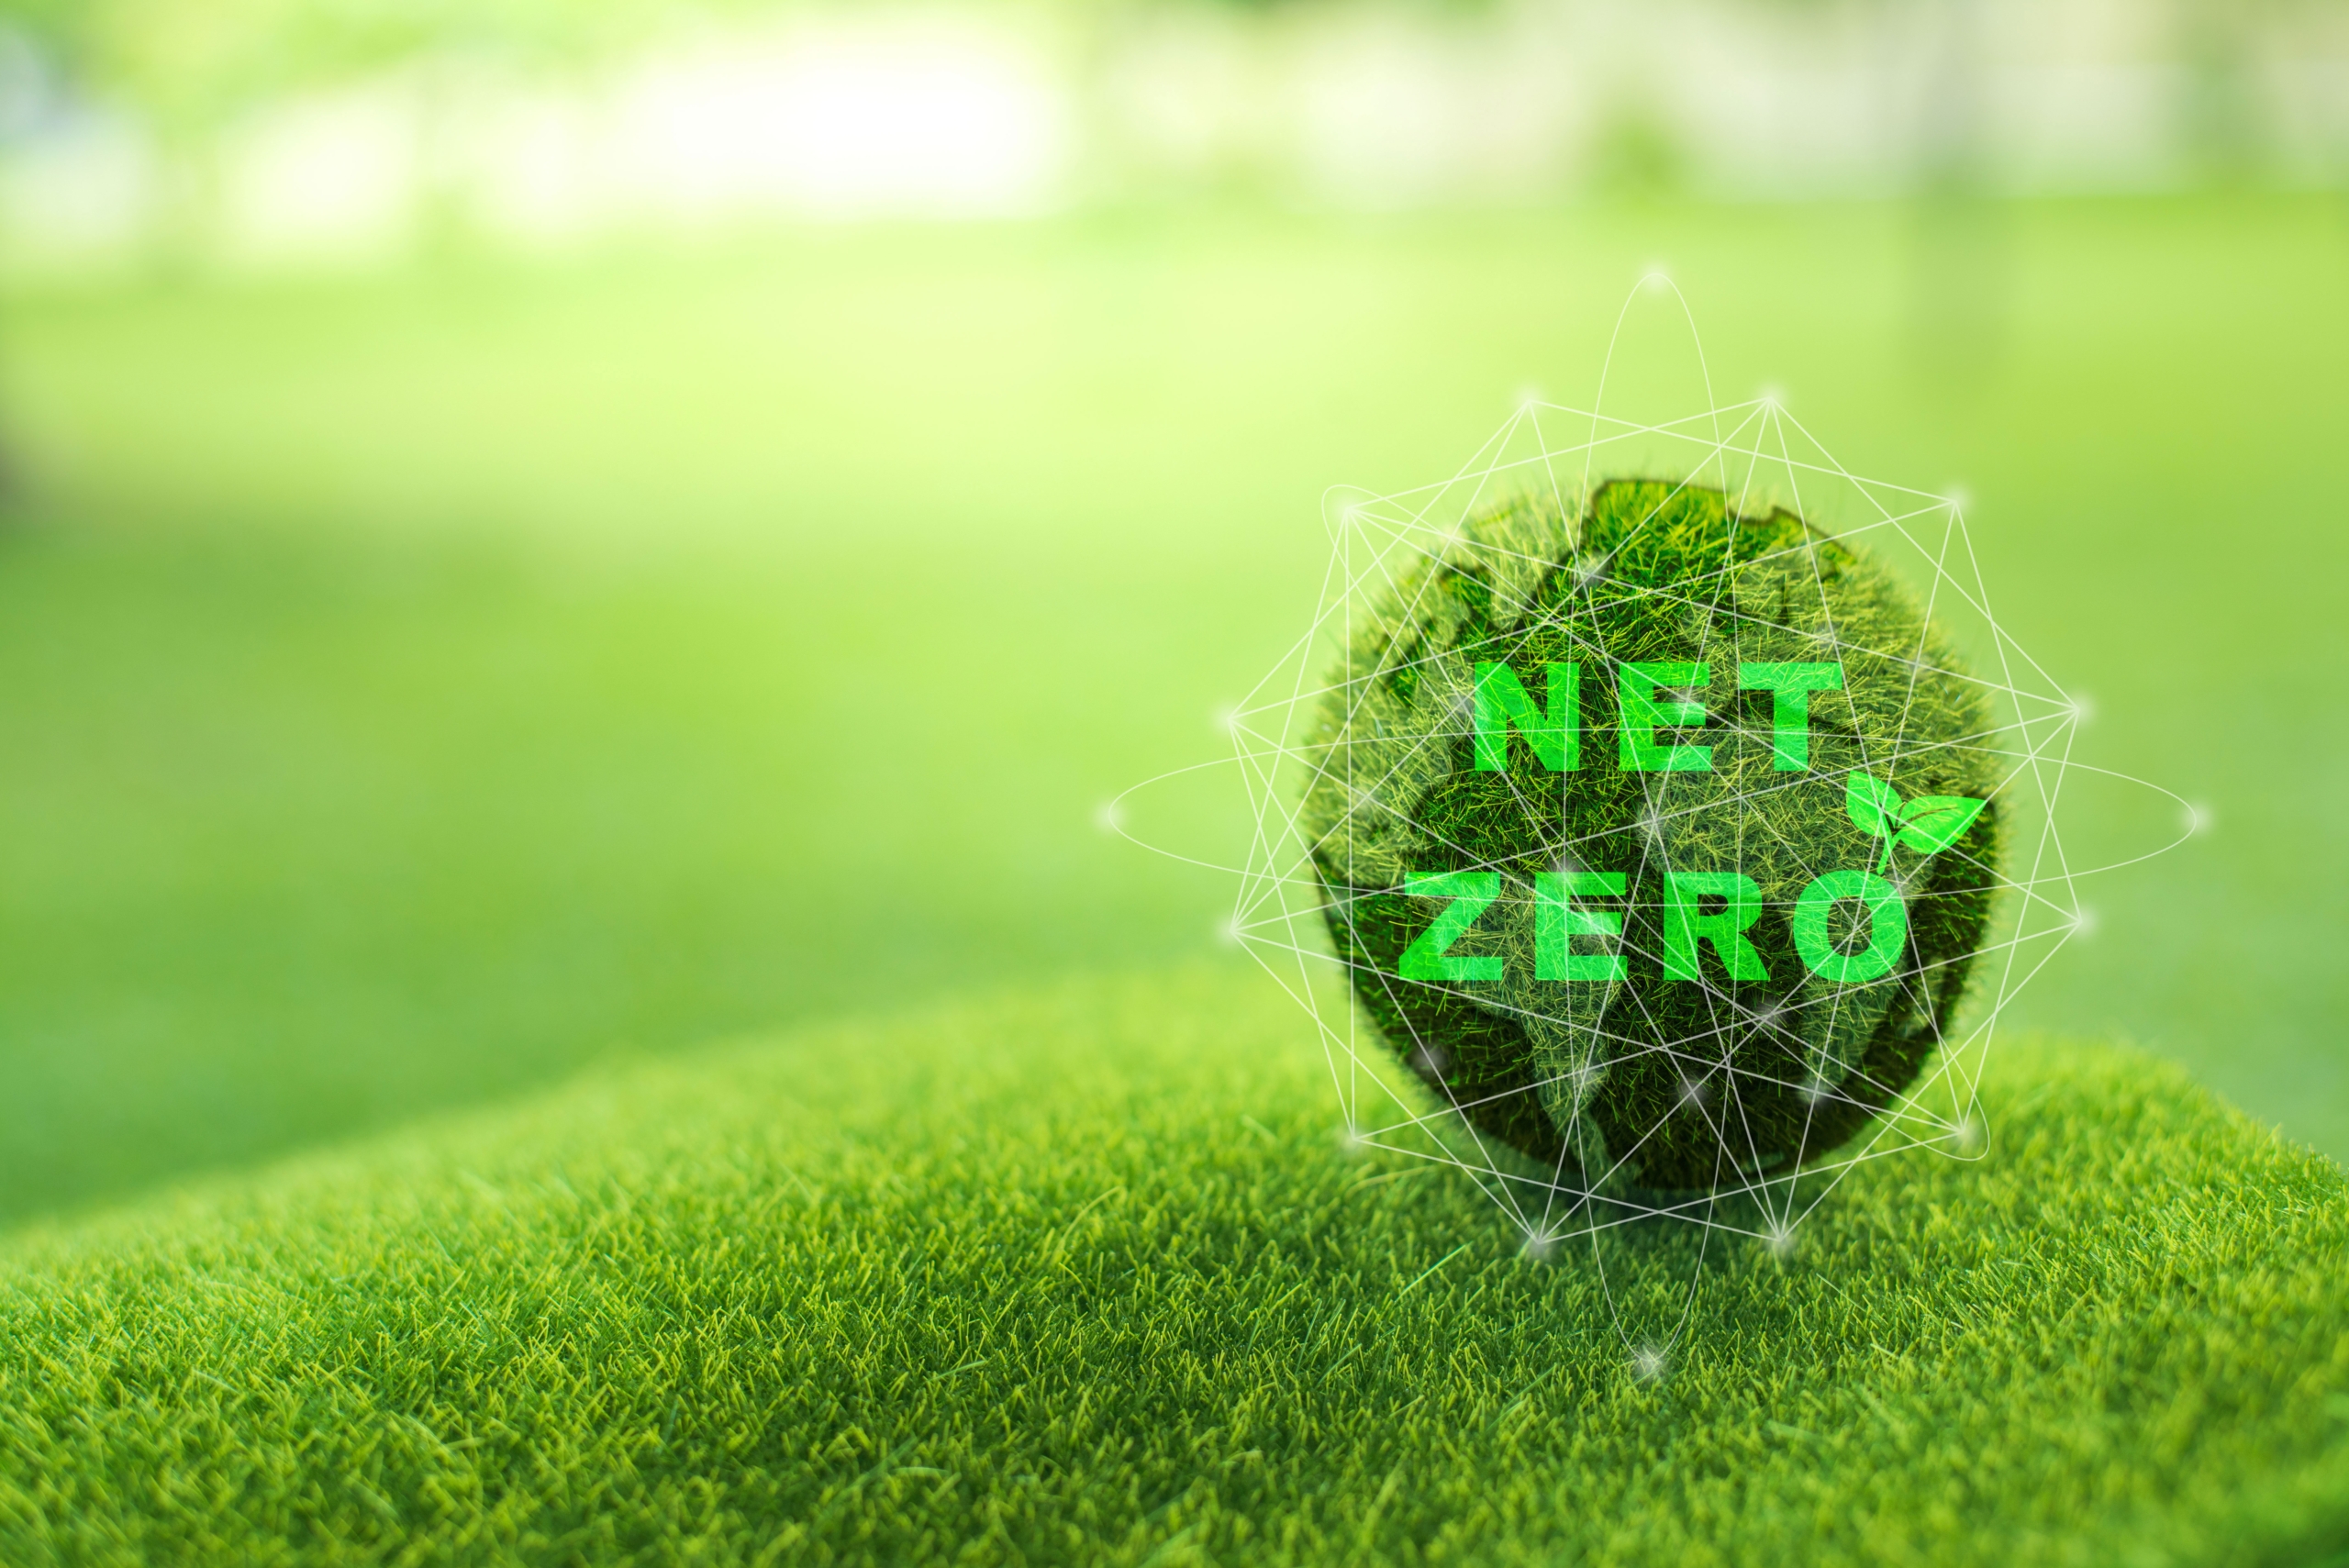 Stain on Green Claims: NAD Finds “Net Zero” Claims Unsupported